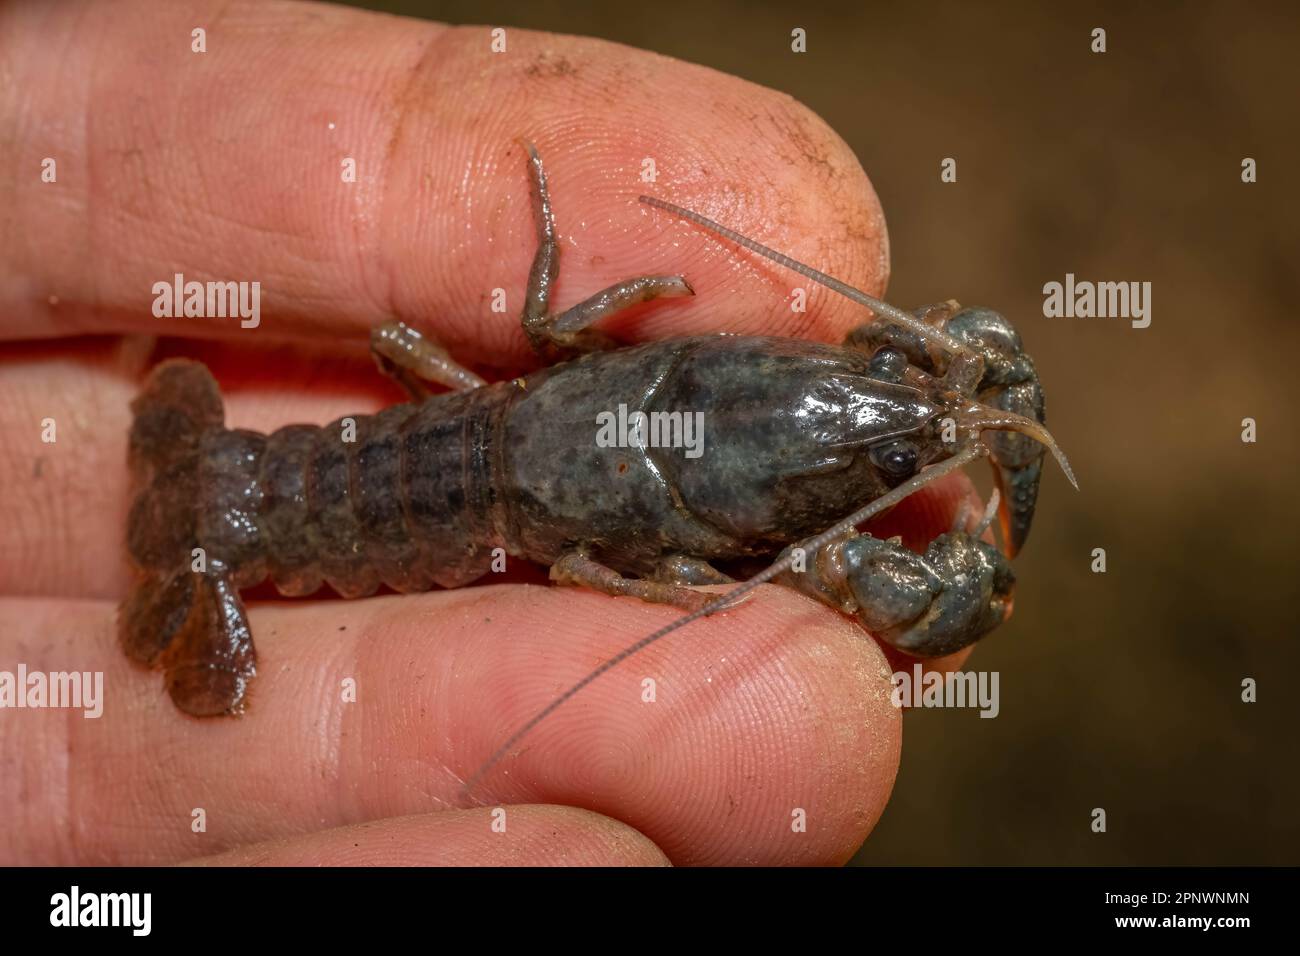 Top view of a Crayfish or Crawdad found in a creek. Raleigh, North Carolina. Stock Photo